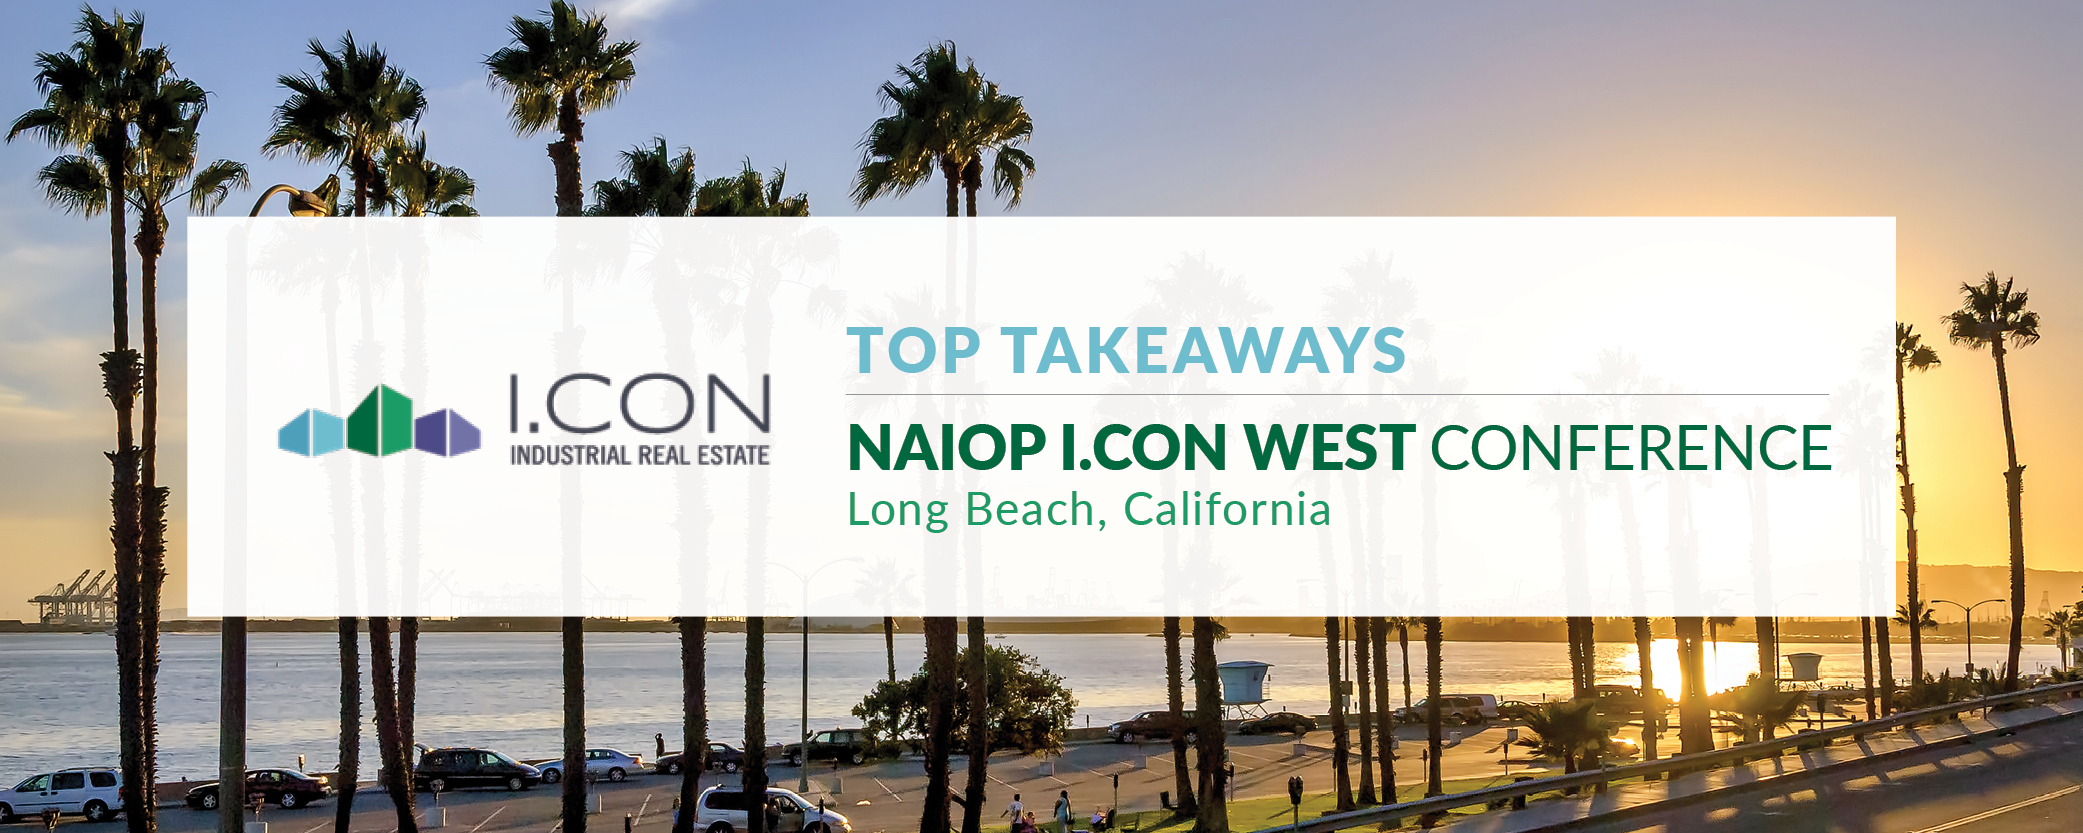 Top takeaways: naiop icon west conference